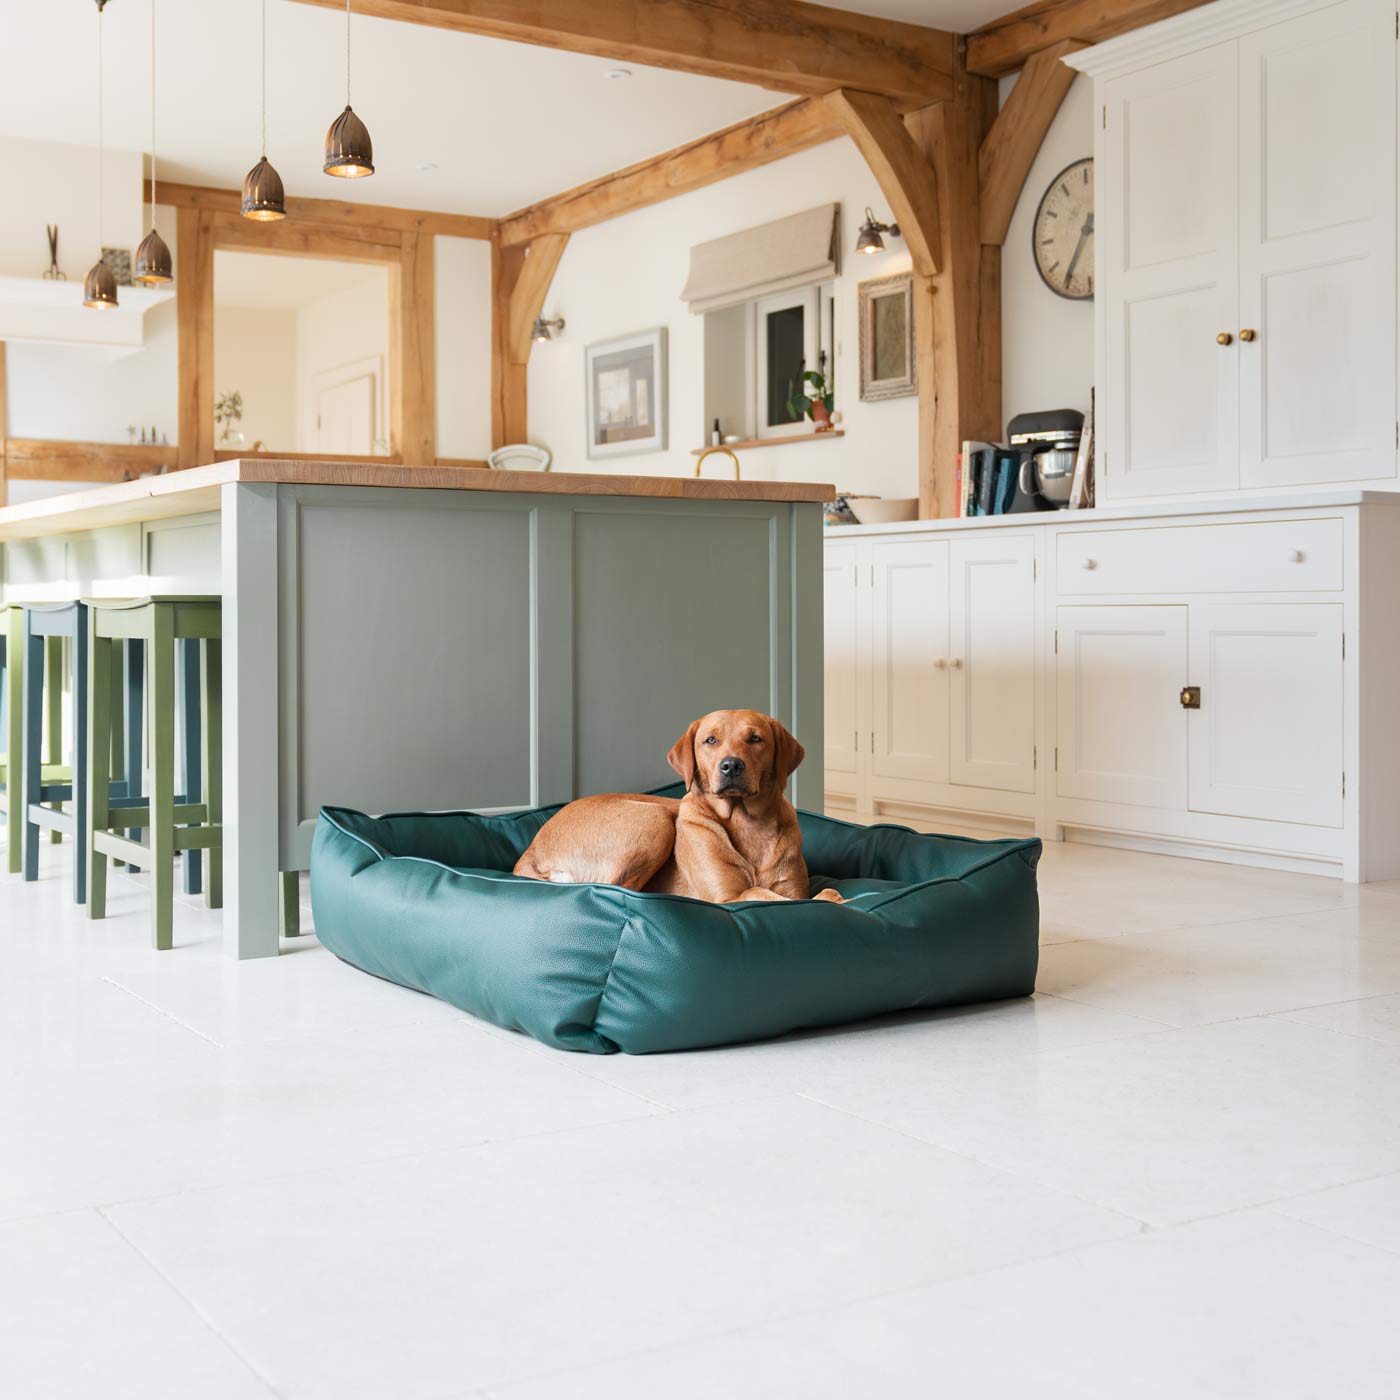 Luxury Handmade Box Bed in Rhino Tough Jungle Faux Leather, in Forest Green, Perfect For Your Pets Nap Time! Available To Personalize at Lords & Labradors US